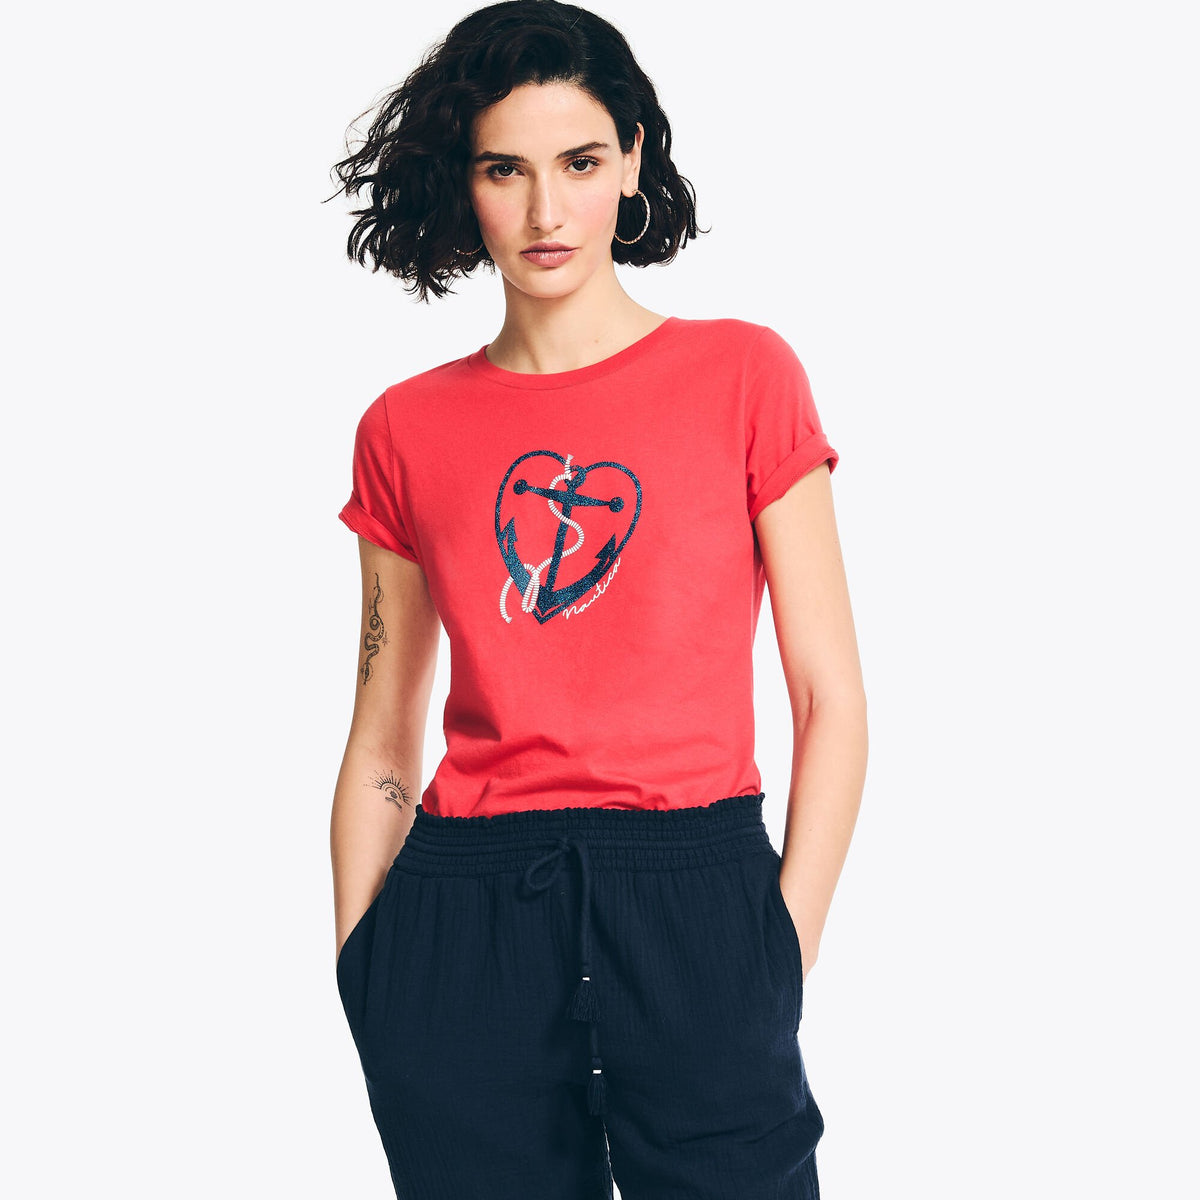 Nautica Women's Sustainably Crafted Glitter Hearted Anchor Graphic T-Shirt Tomato